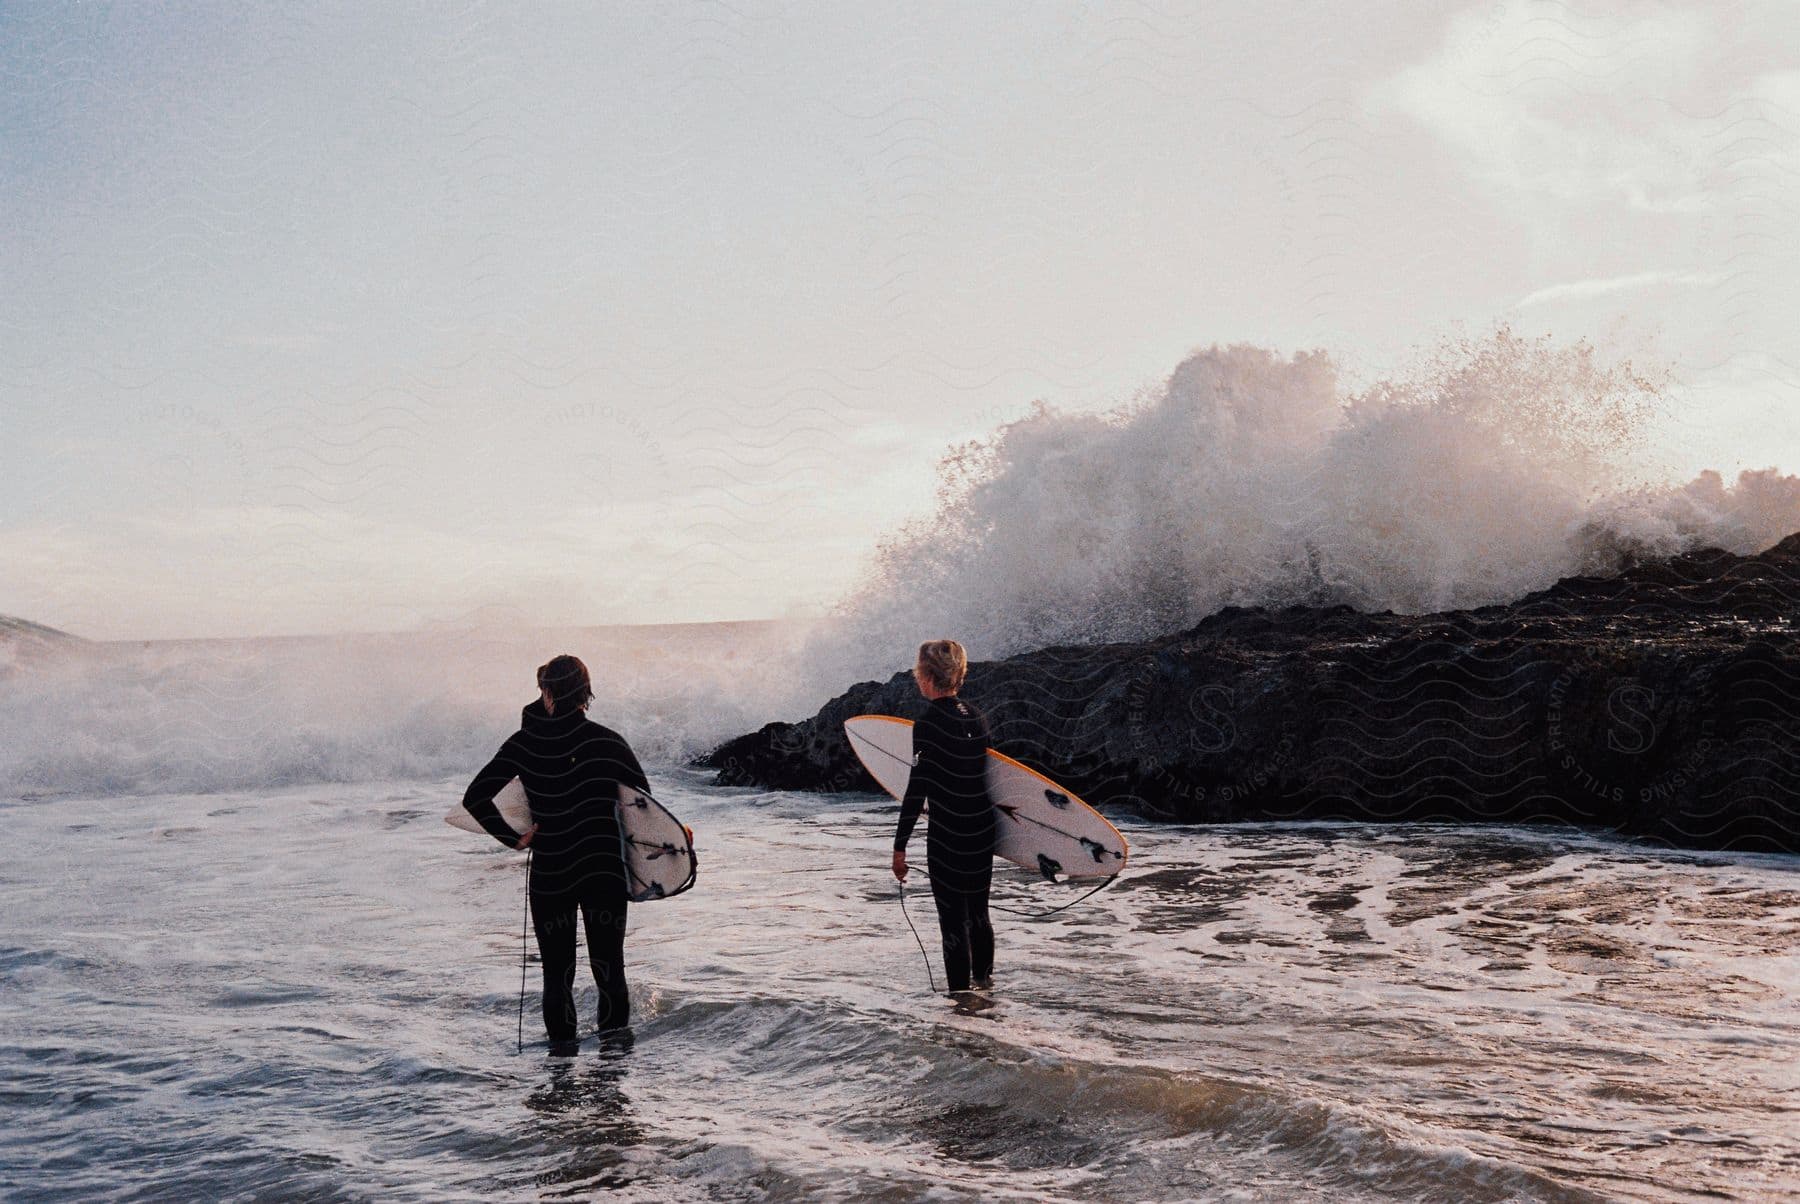 Two individuals holding surfboards observing the waves at an outdoor location